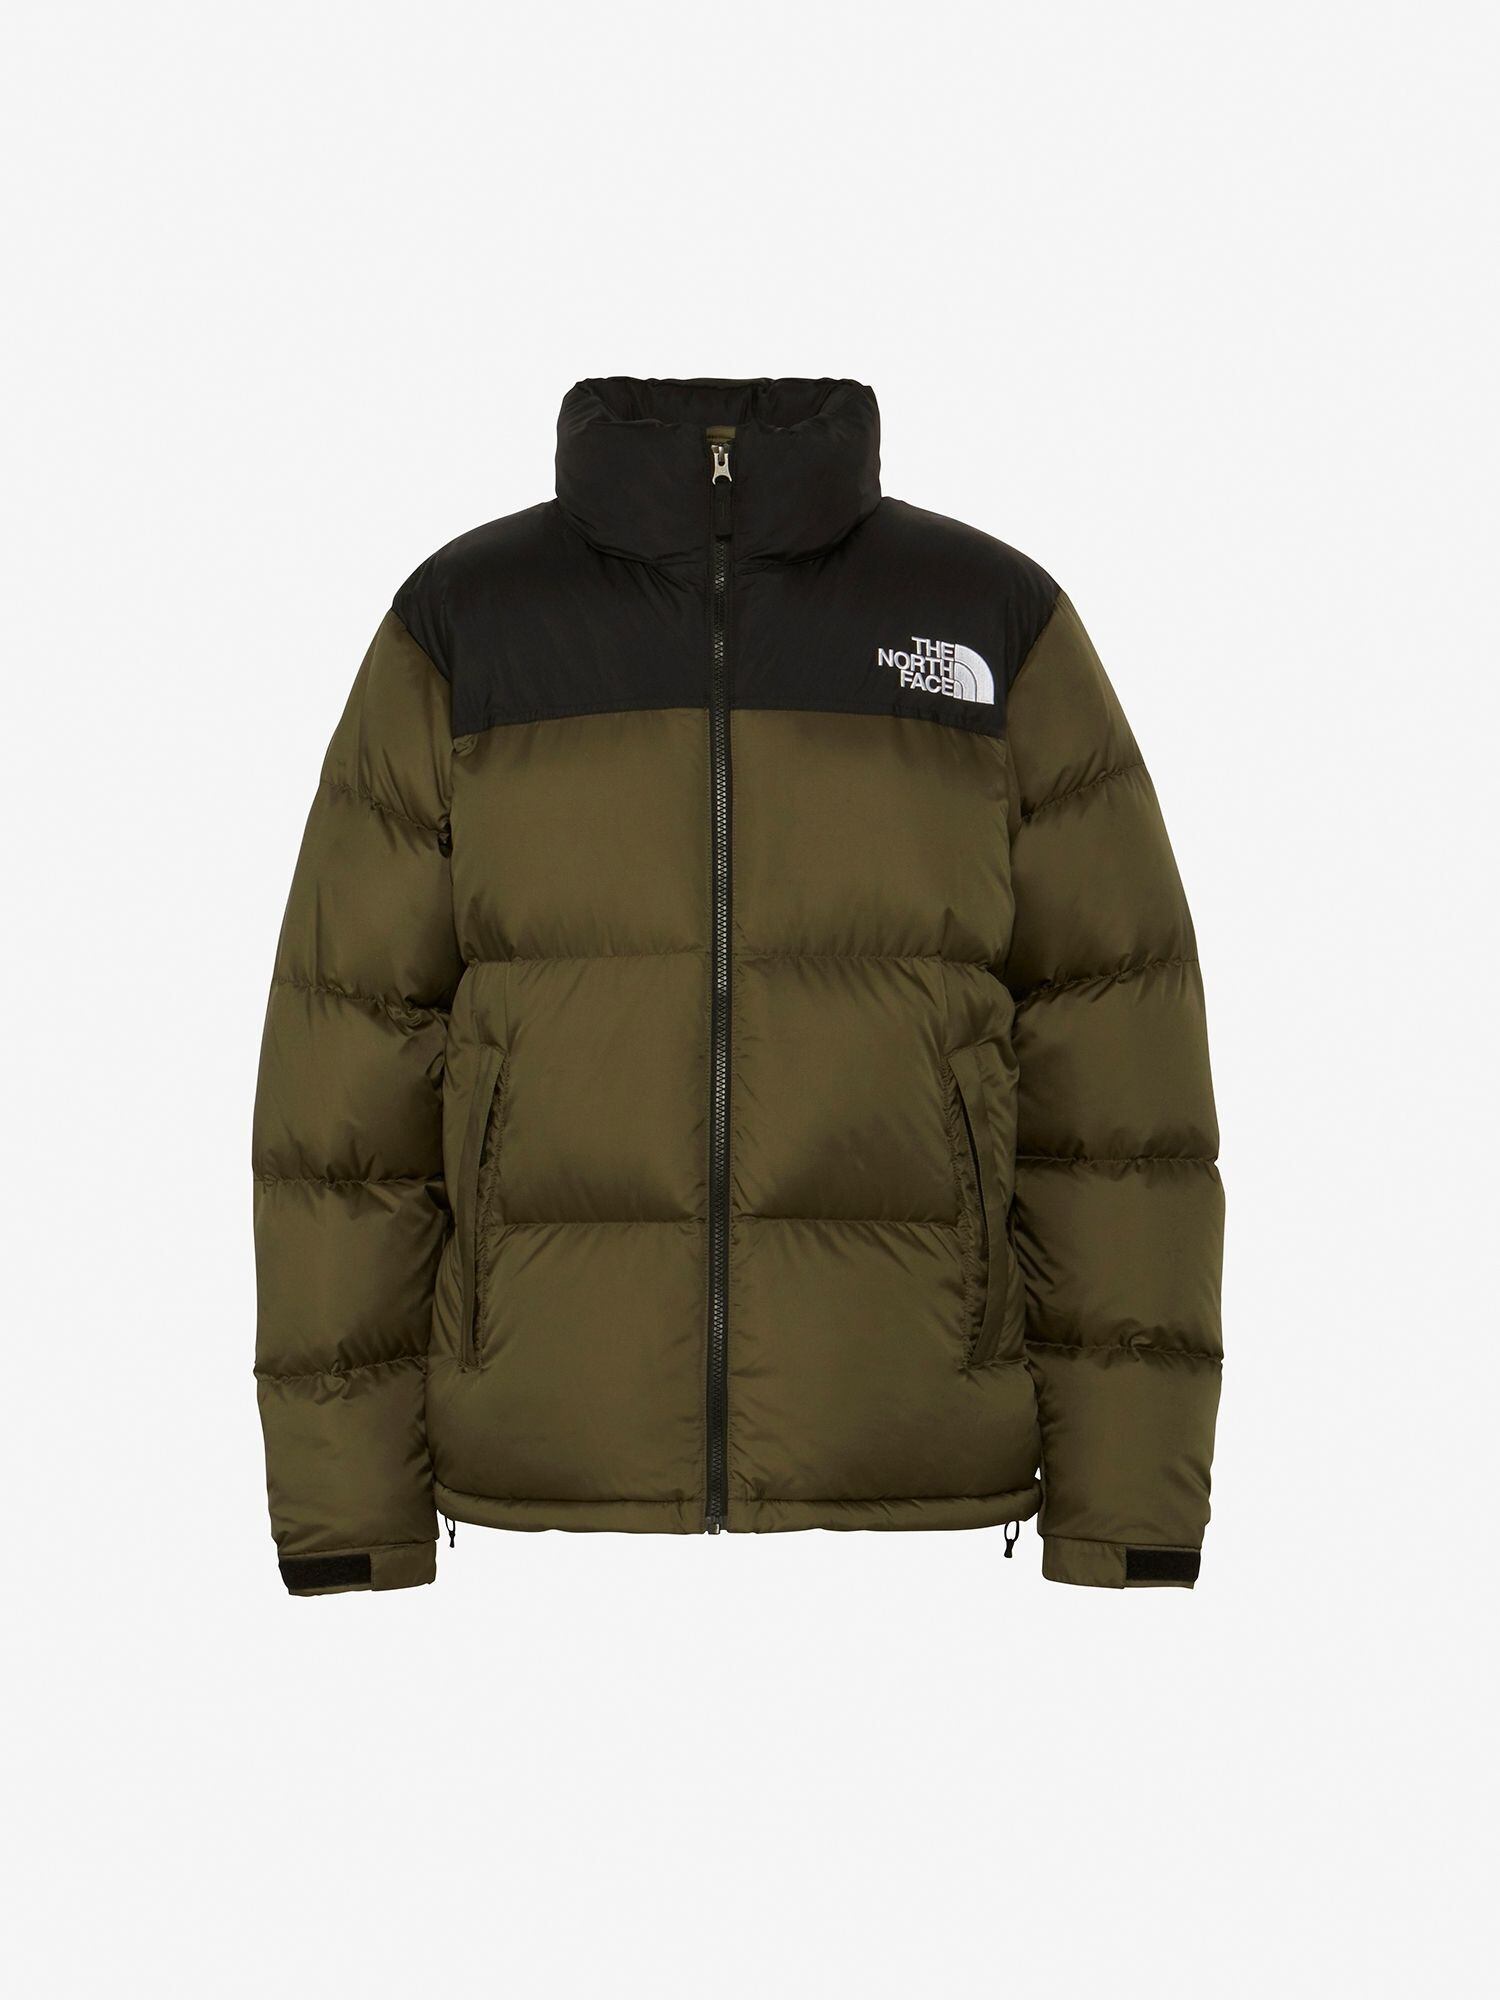 THE NORTH FACE / NUPTSE JACKETND   st. valley house